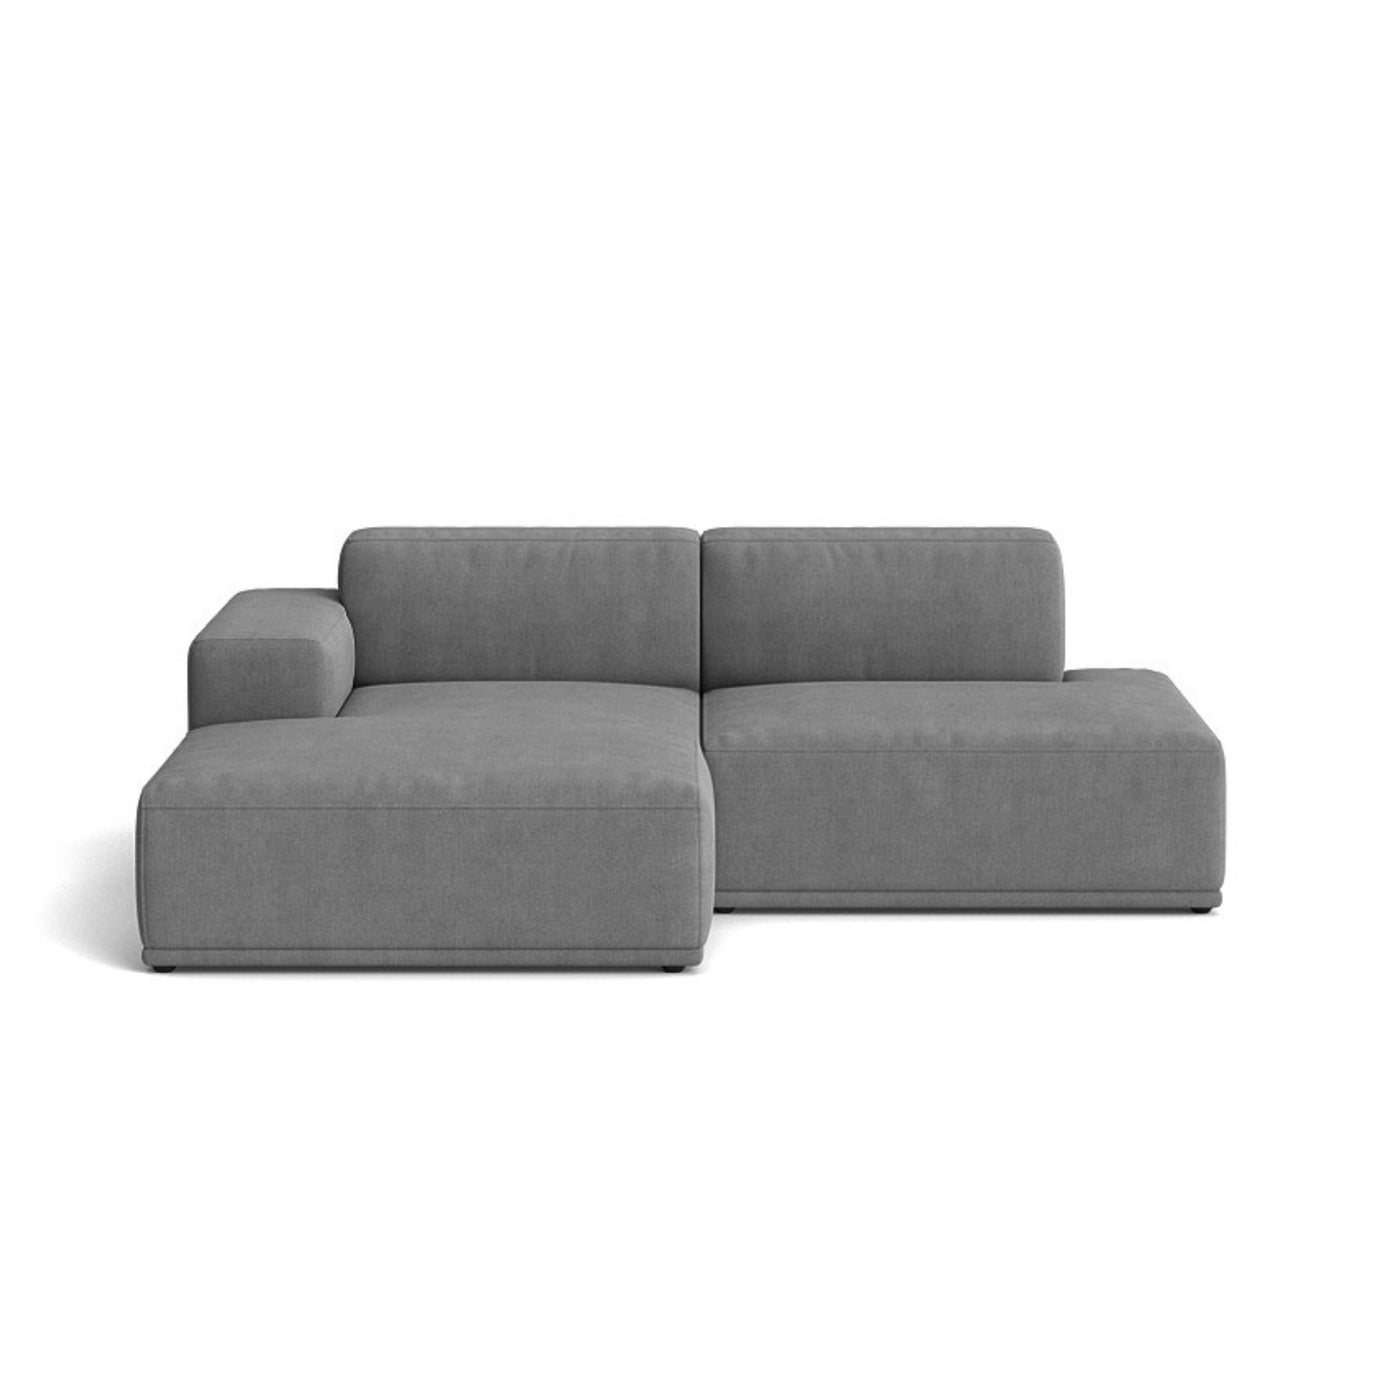 Muuto Connect Soft Modular 2 Seater Sofa, configuration 3. made-to-order from someday designs. #colour_fiord-171